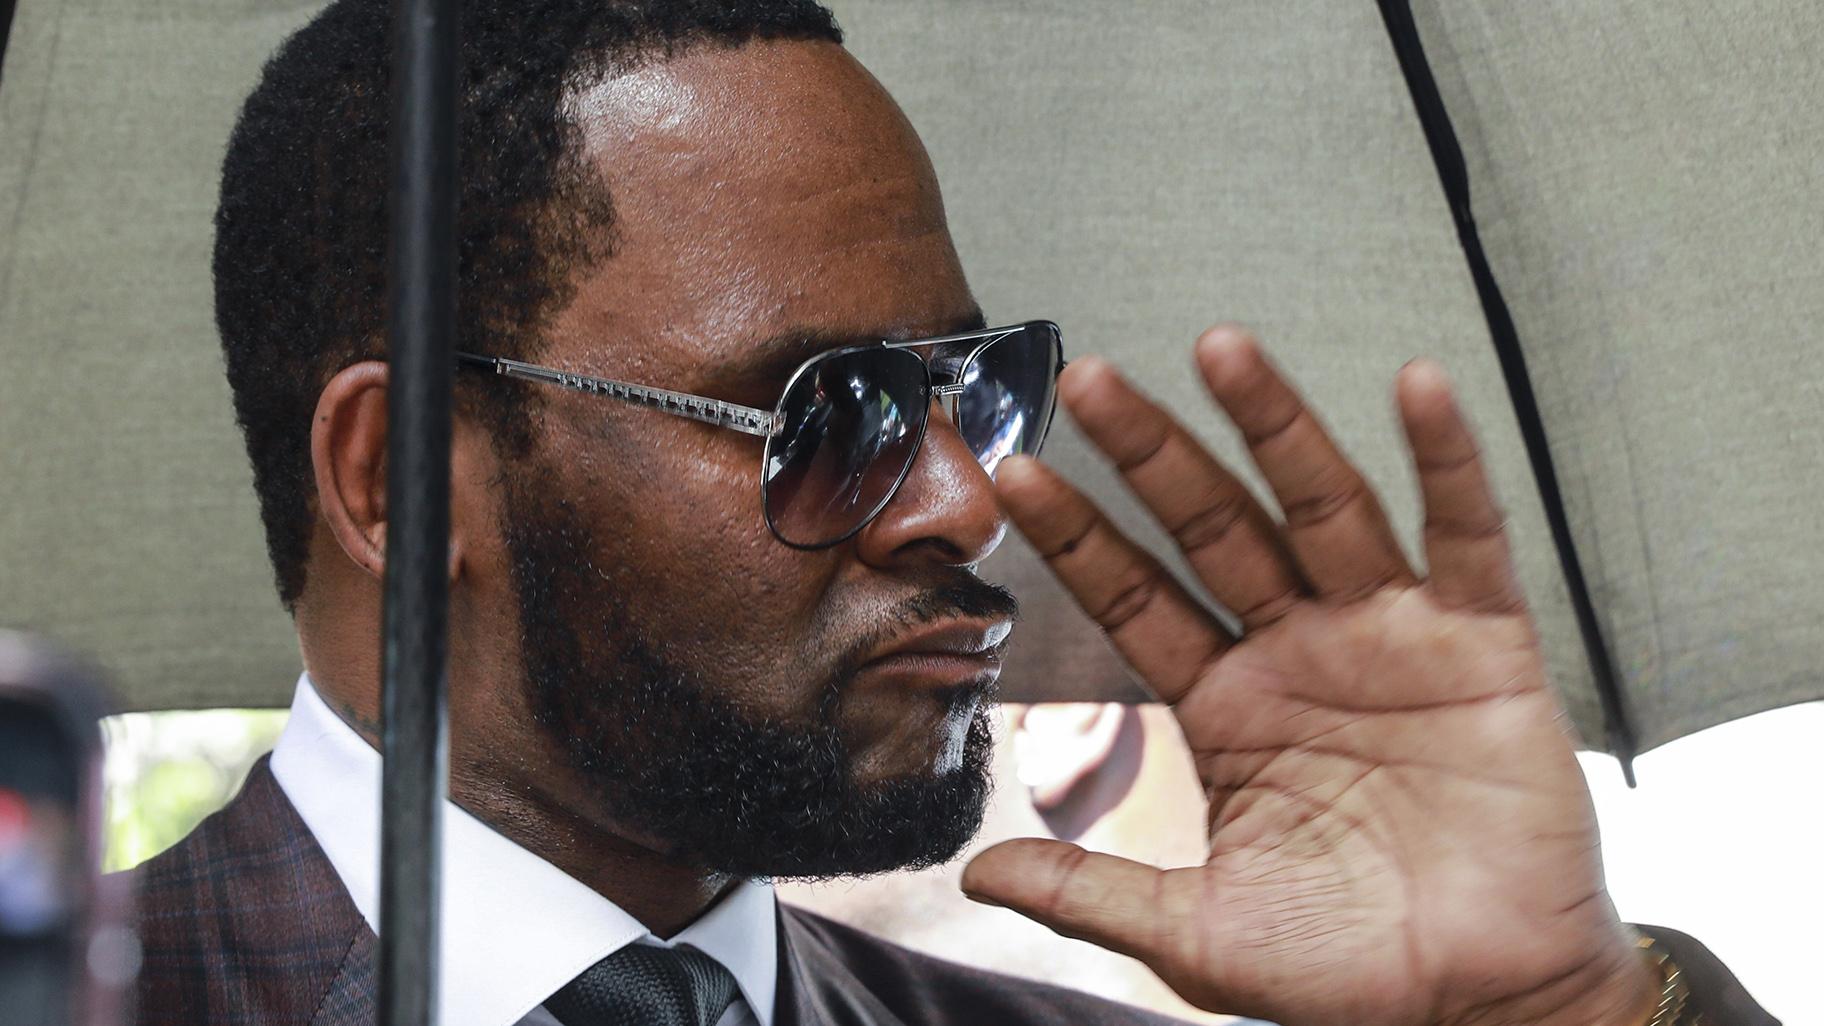 Musician R. Kelly departs from the Leighton Criminal Court building after a status hearing in his criminal sexual abuse trial Wednesday, June 26, 2019 in Chicago. (AP Photo / Amr Alfiky)